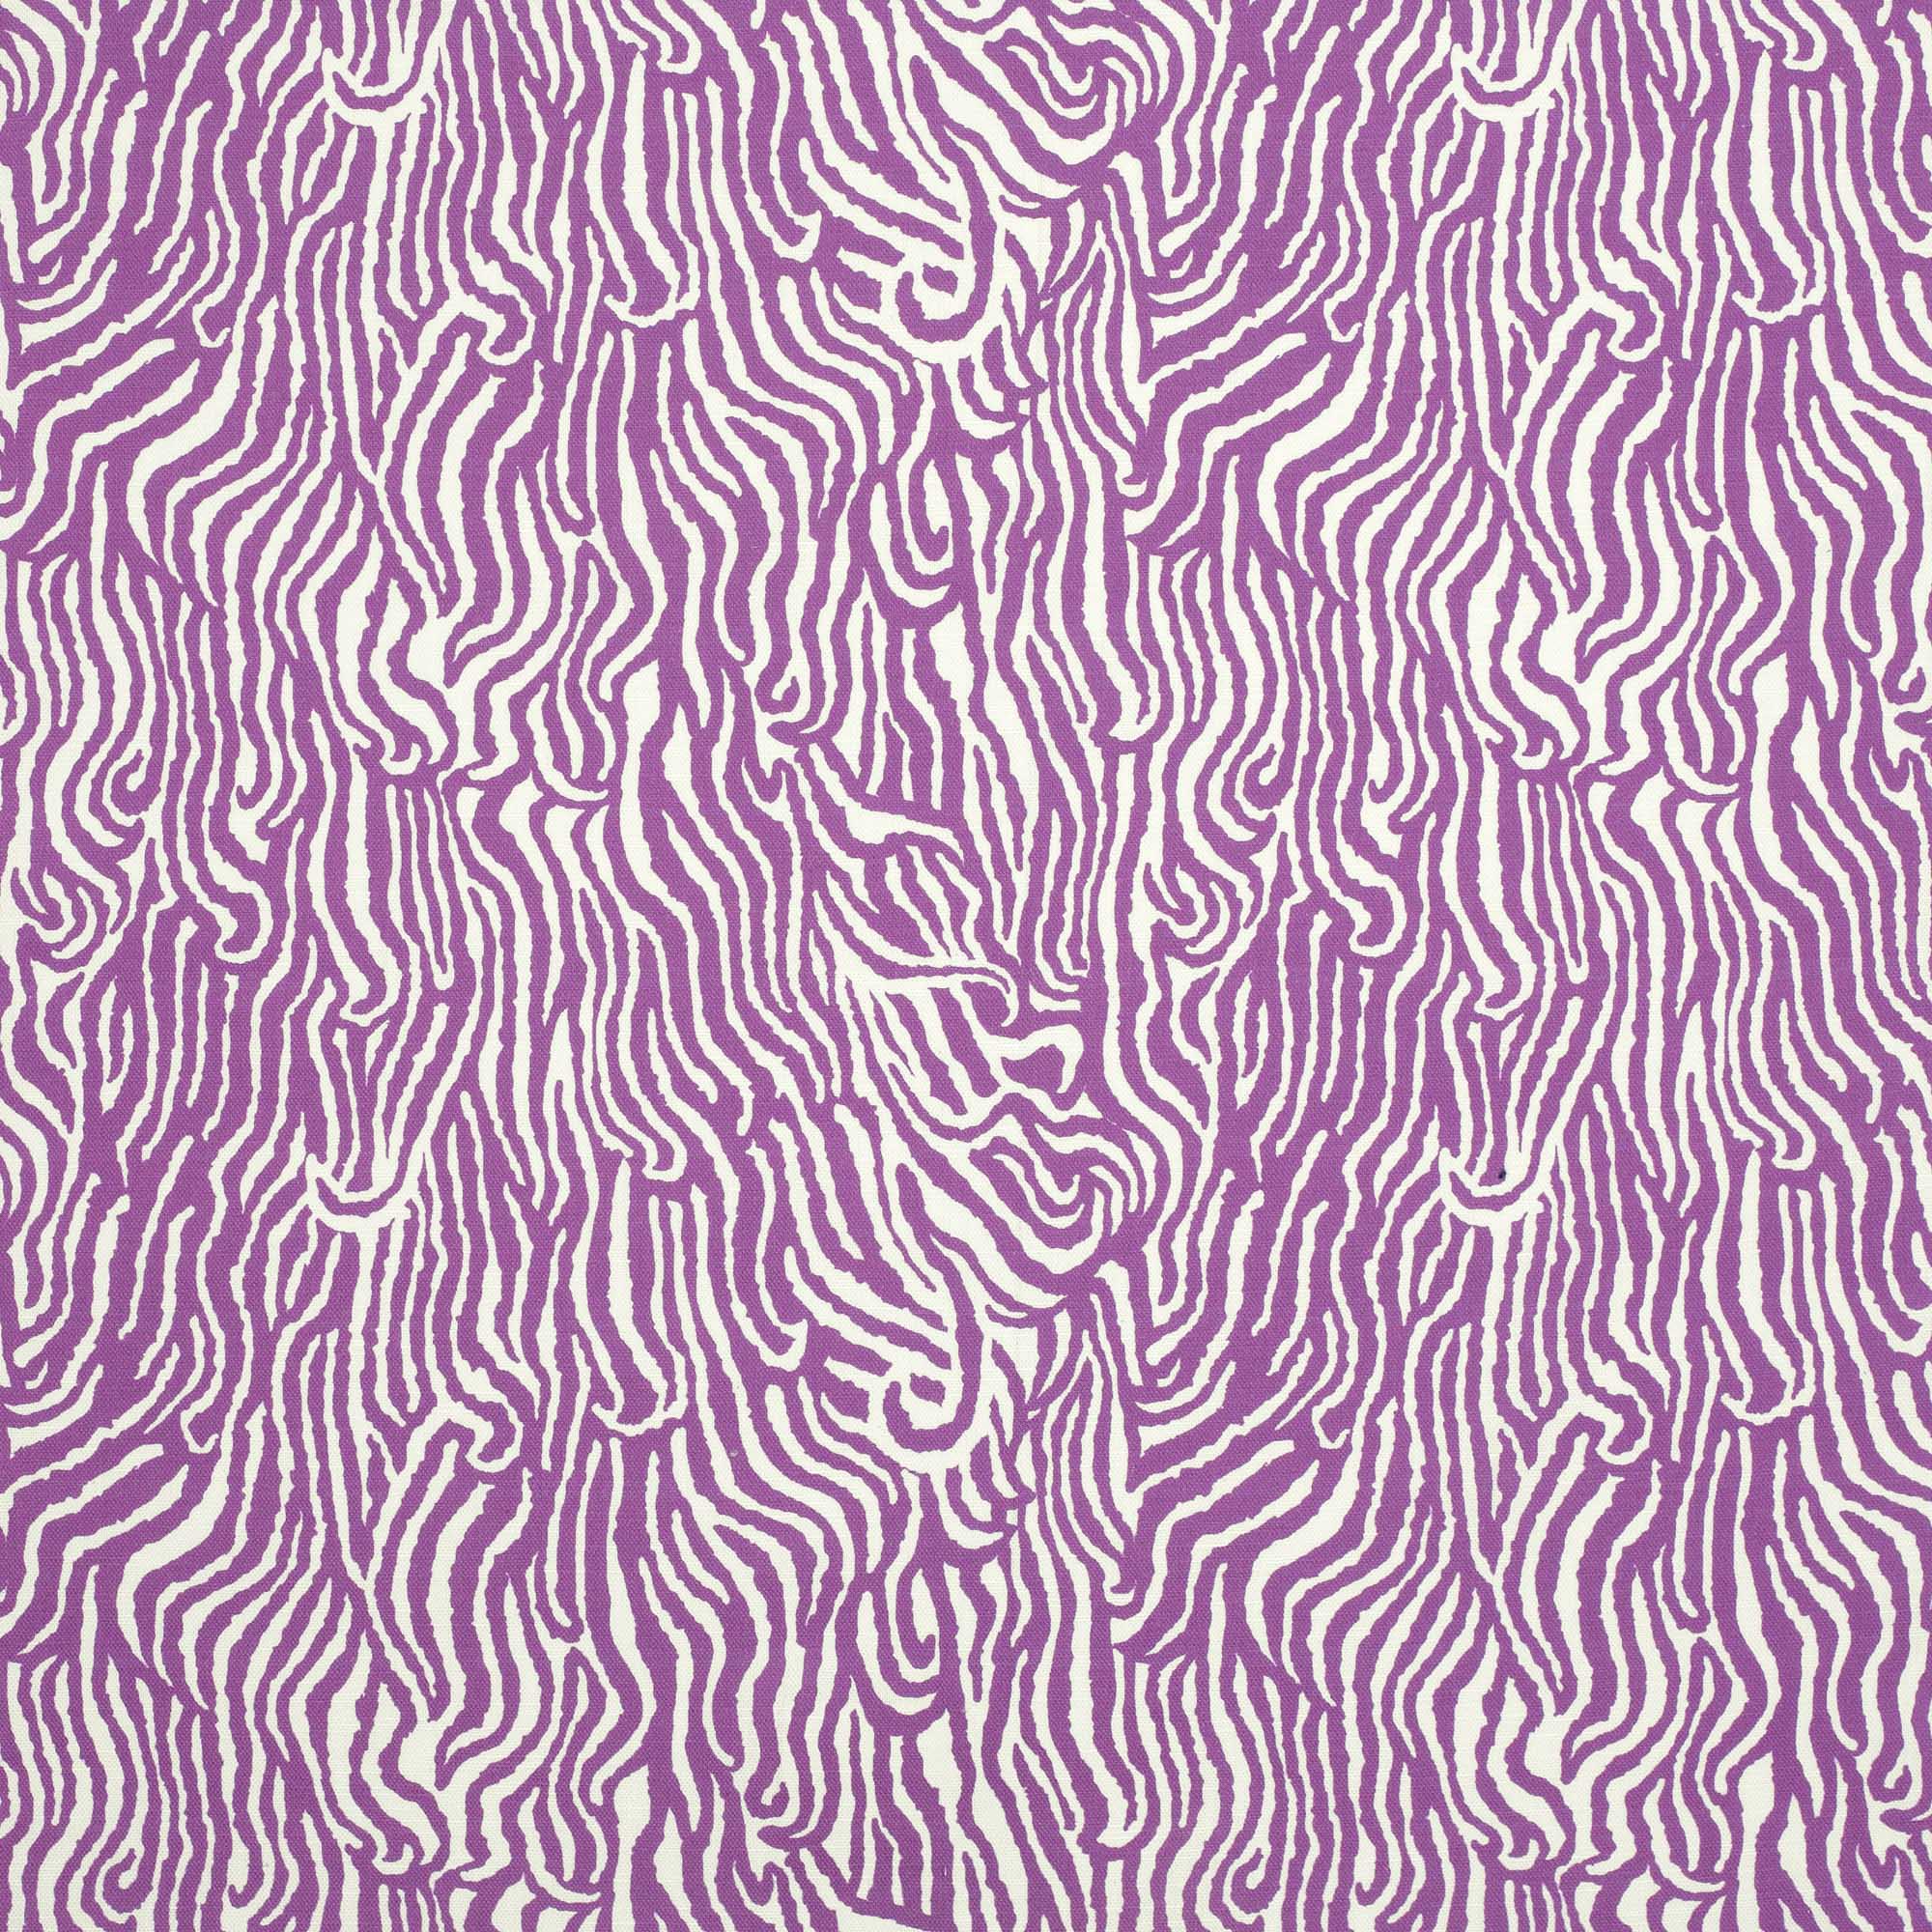 Detail of fabric in a playful animal print in purple on a white field.